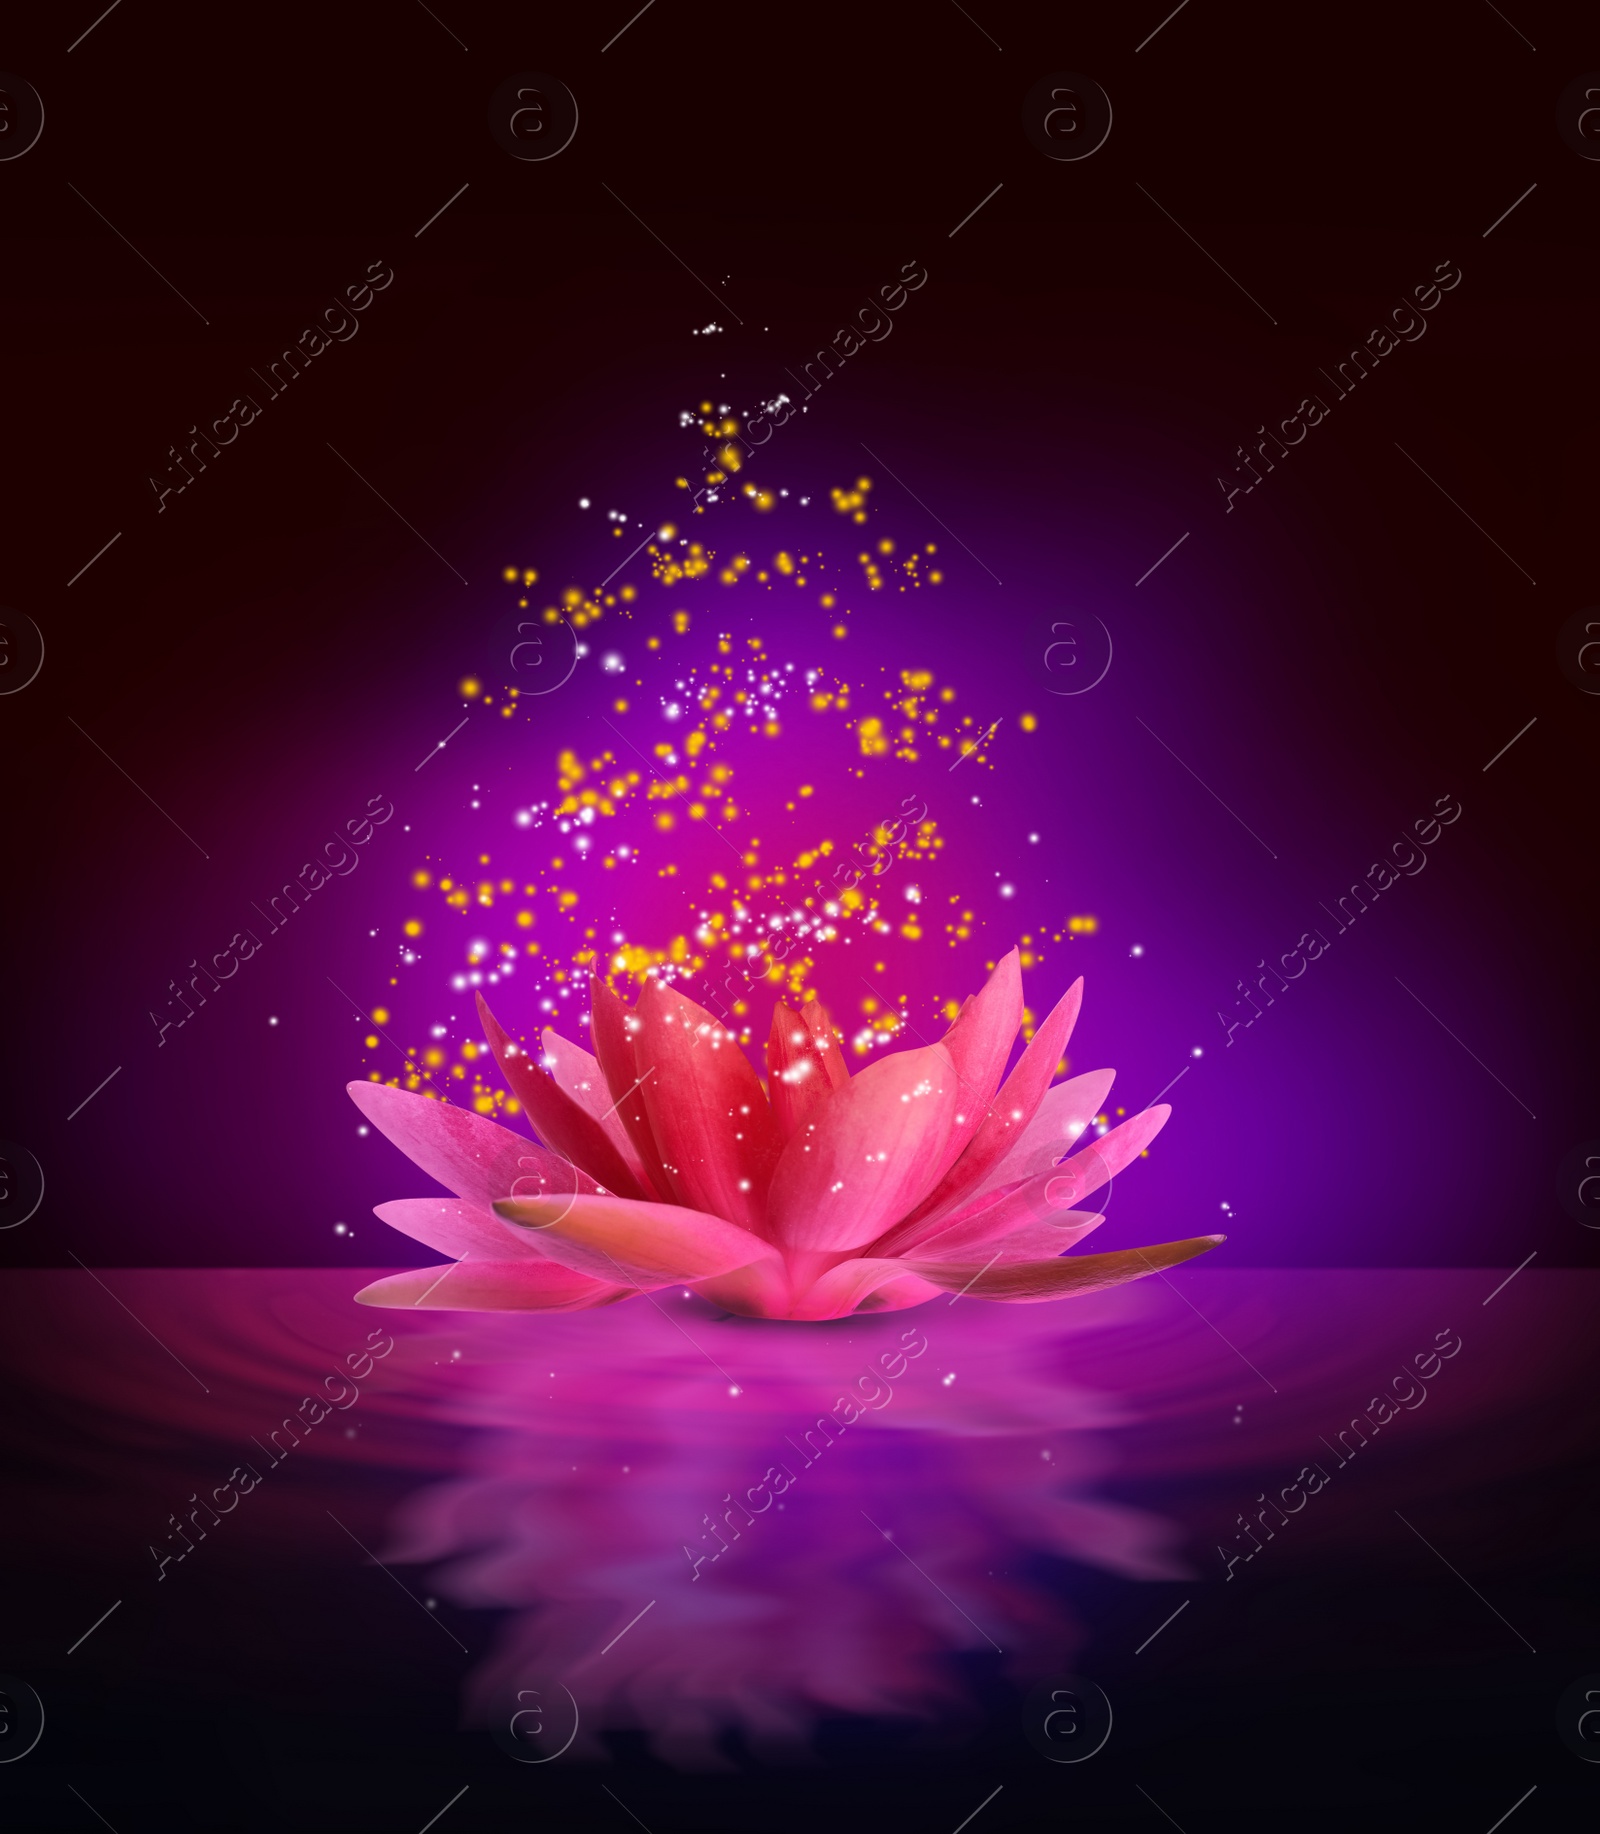 Image of Fantastic lotus flower with sparks on water surface